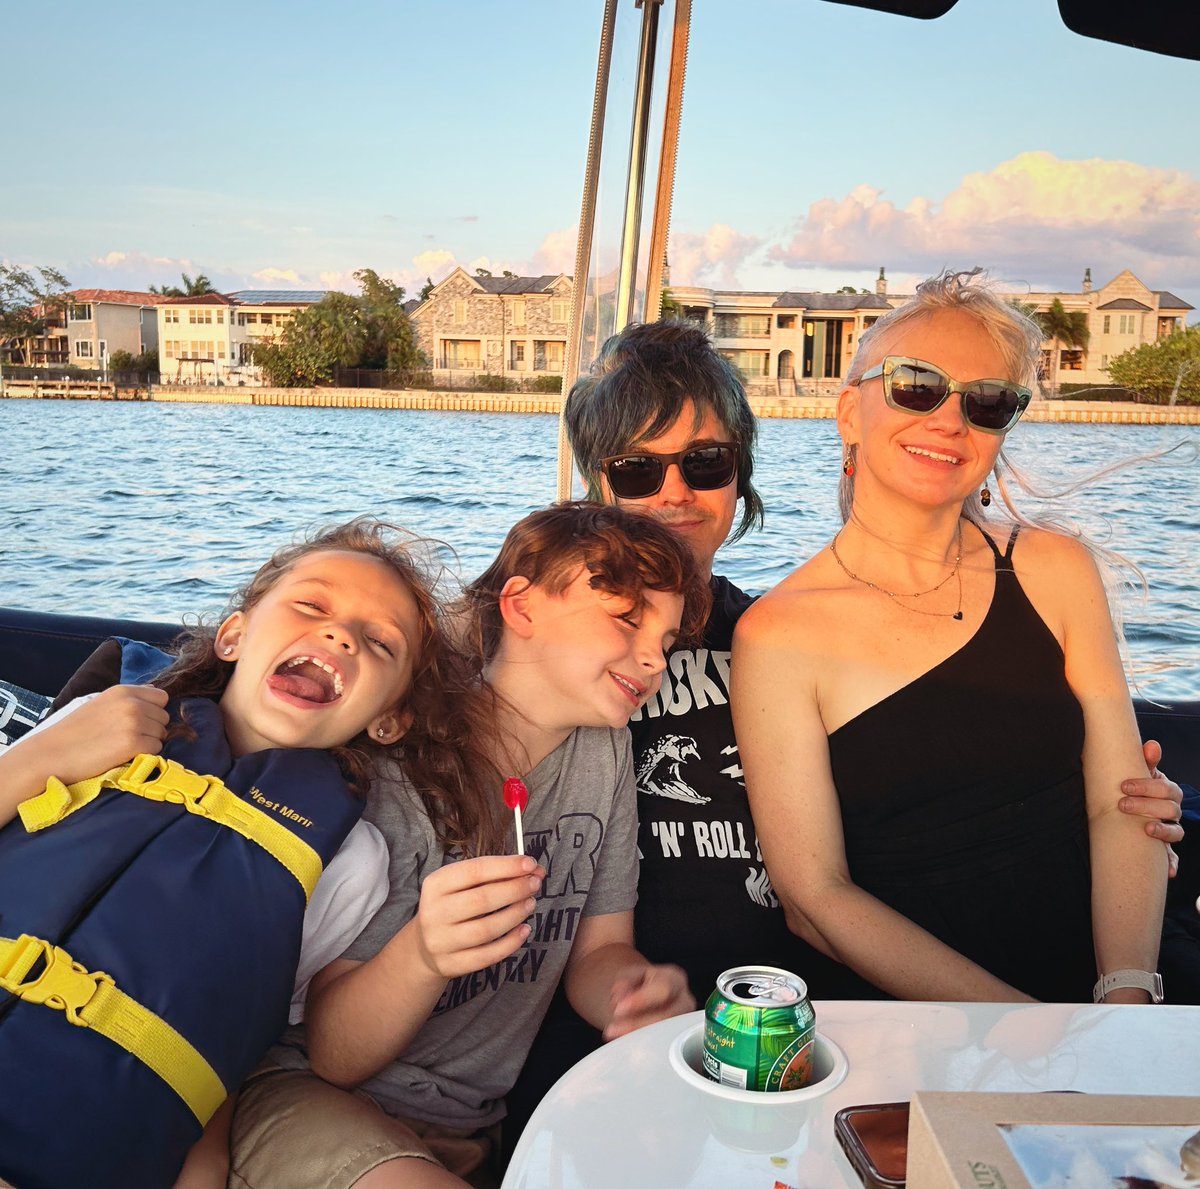 Sunset on a boat. Bliss. Grateful.
#friday #fridayvibes #family #dollyrots